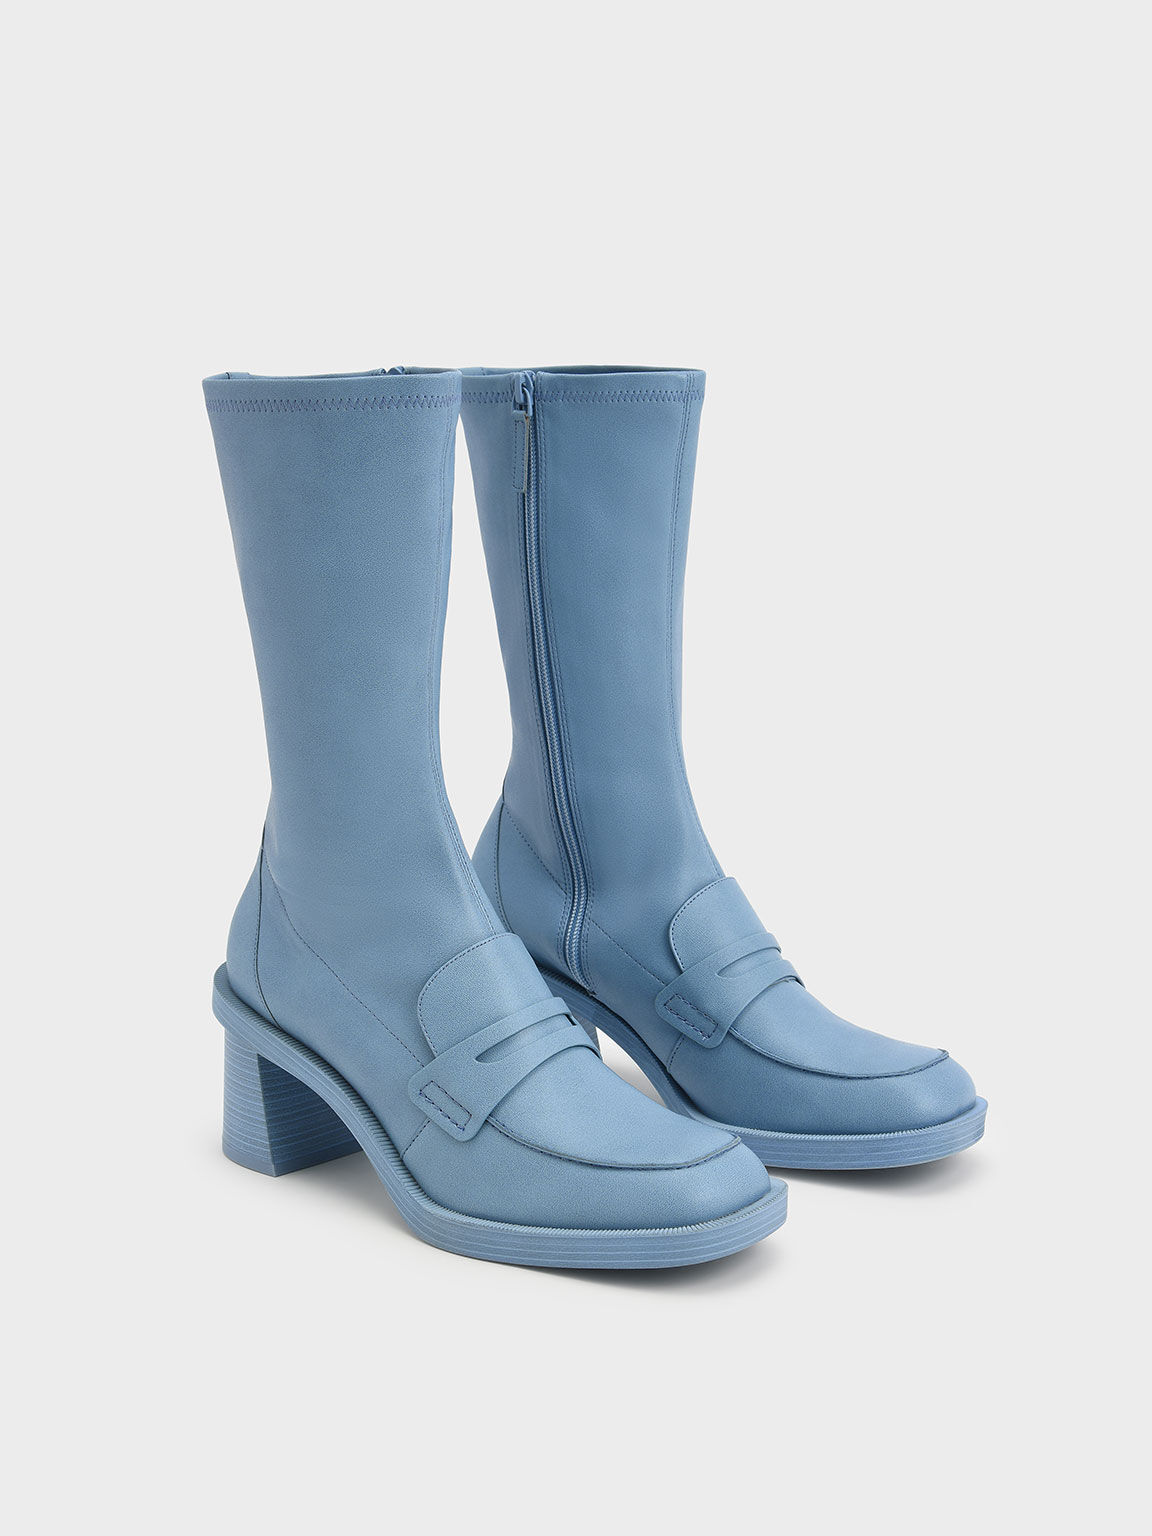 Haisley Penny Loafer Calf Boots, Blue, hi-res